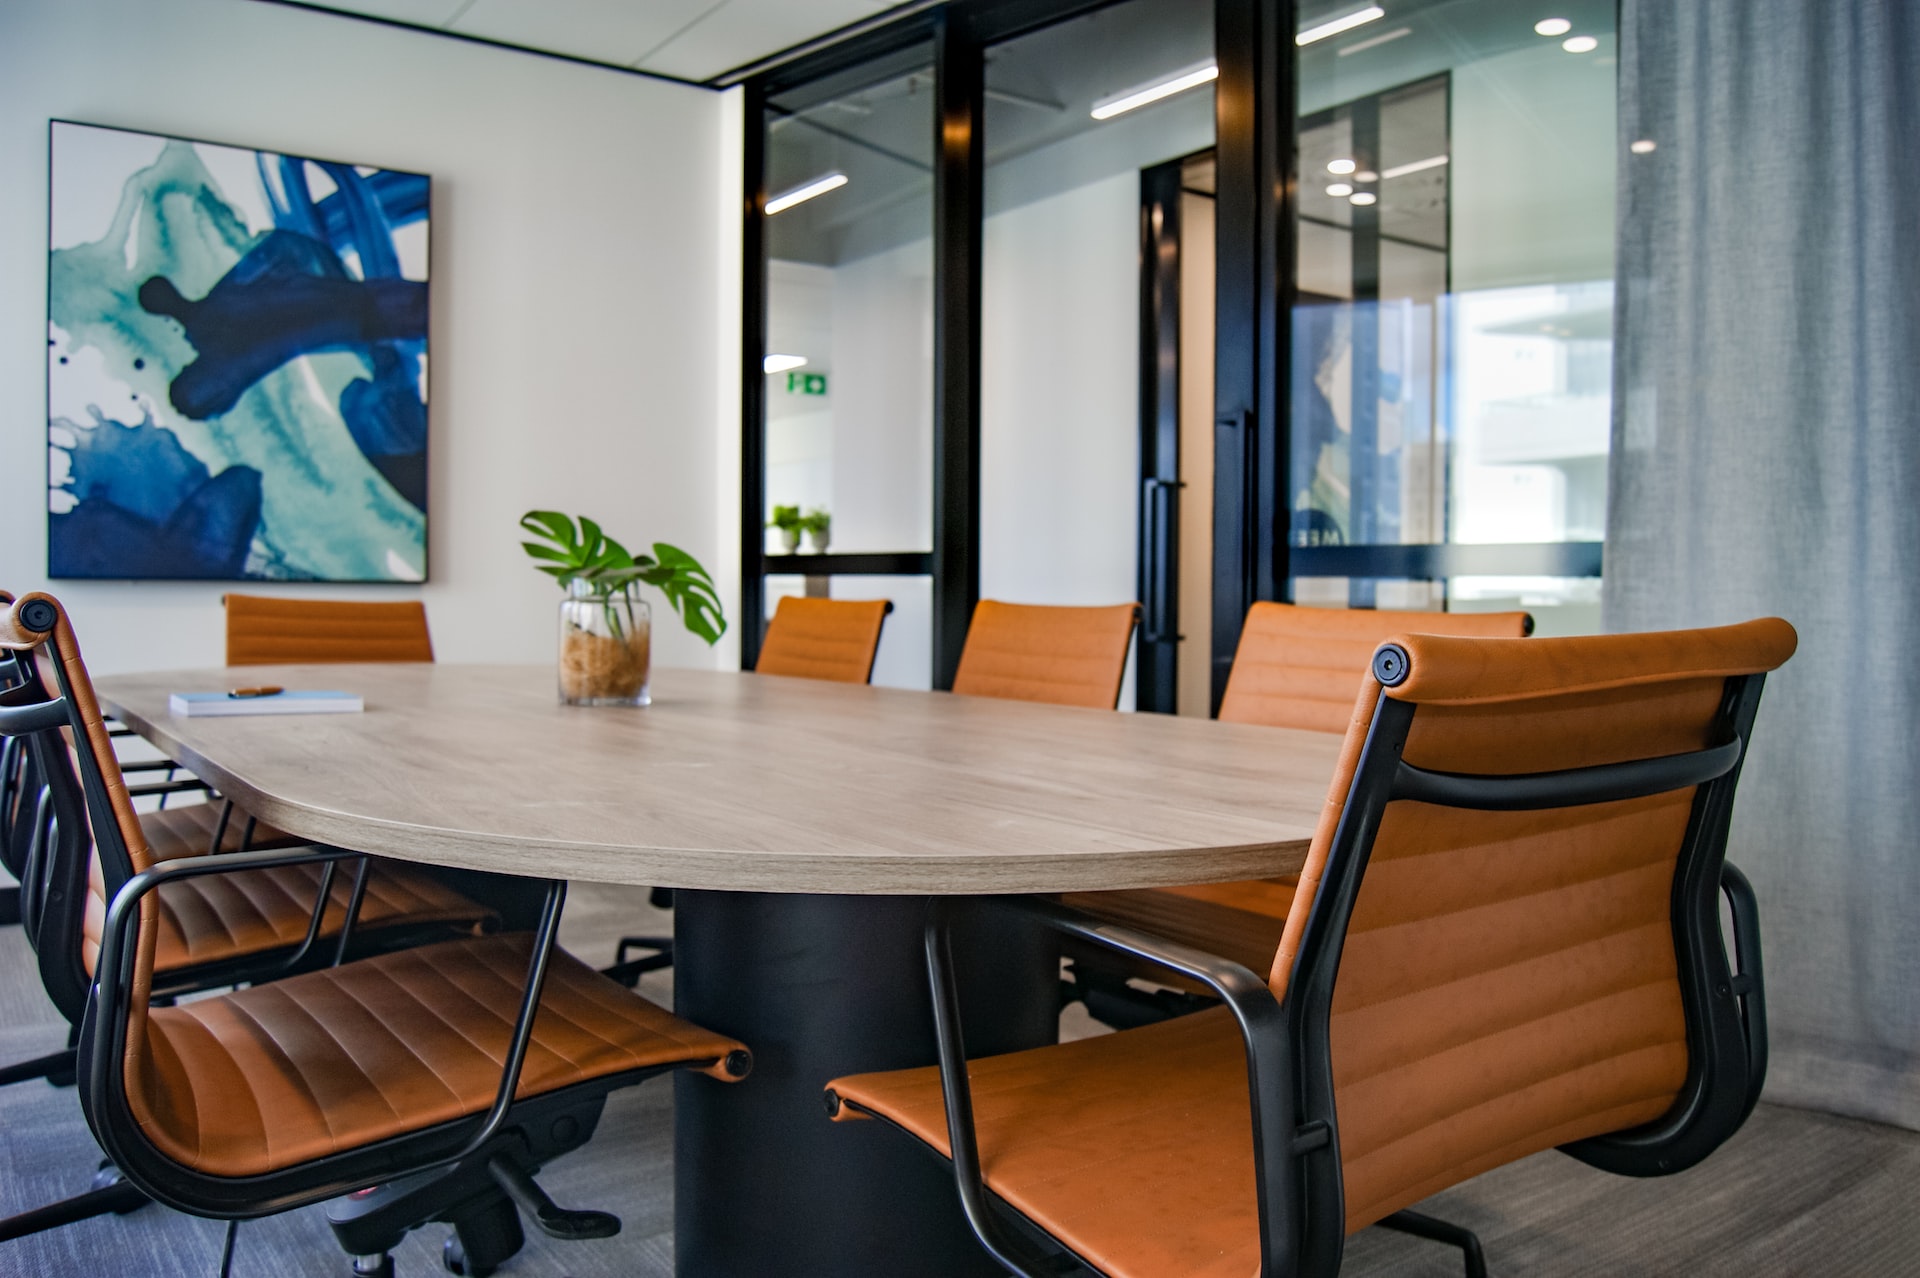 What are the Benefits of Shopping for Modern Office Furniture Online?